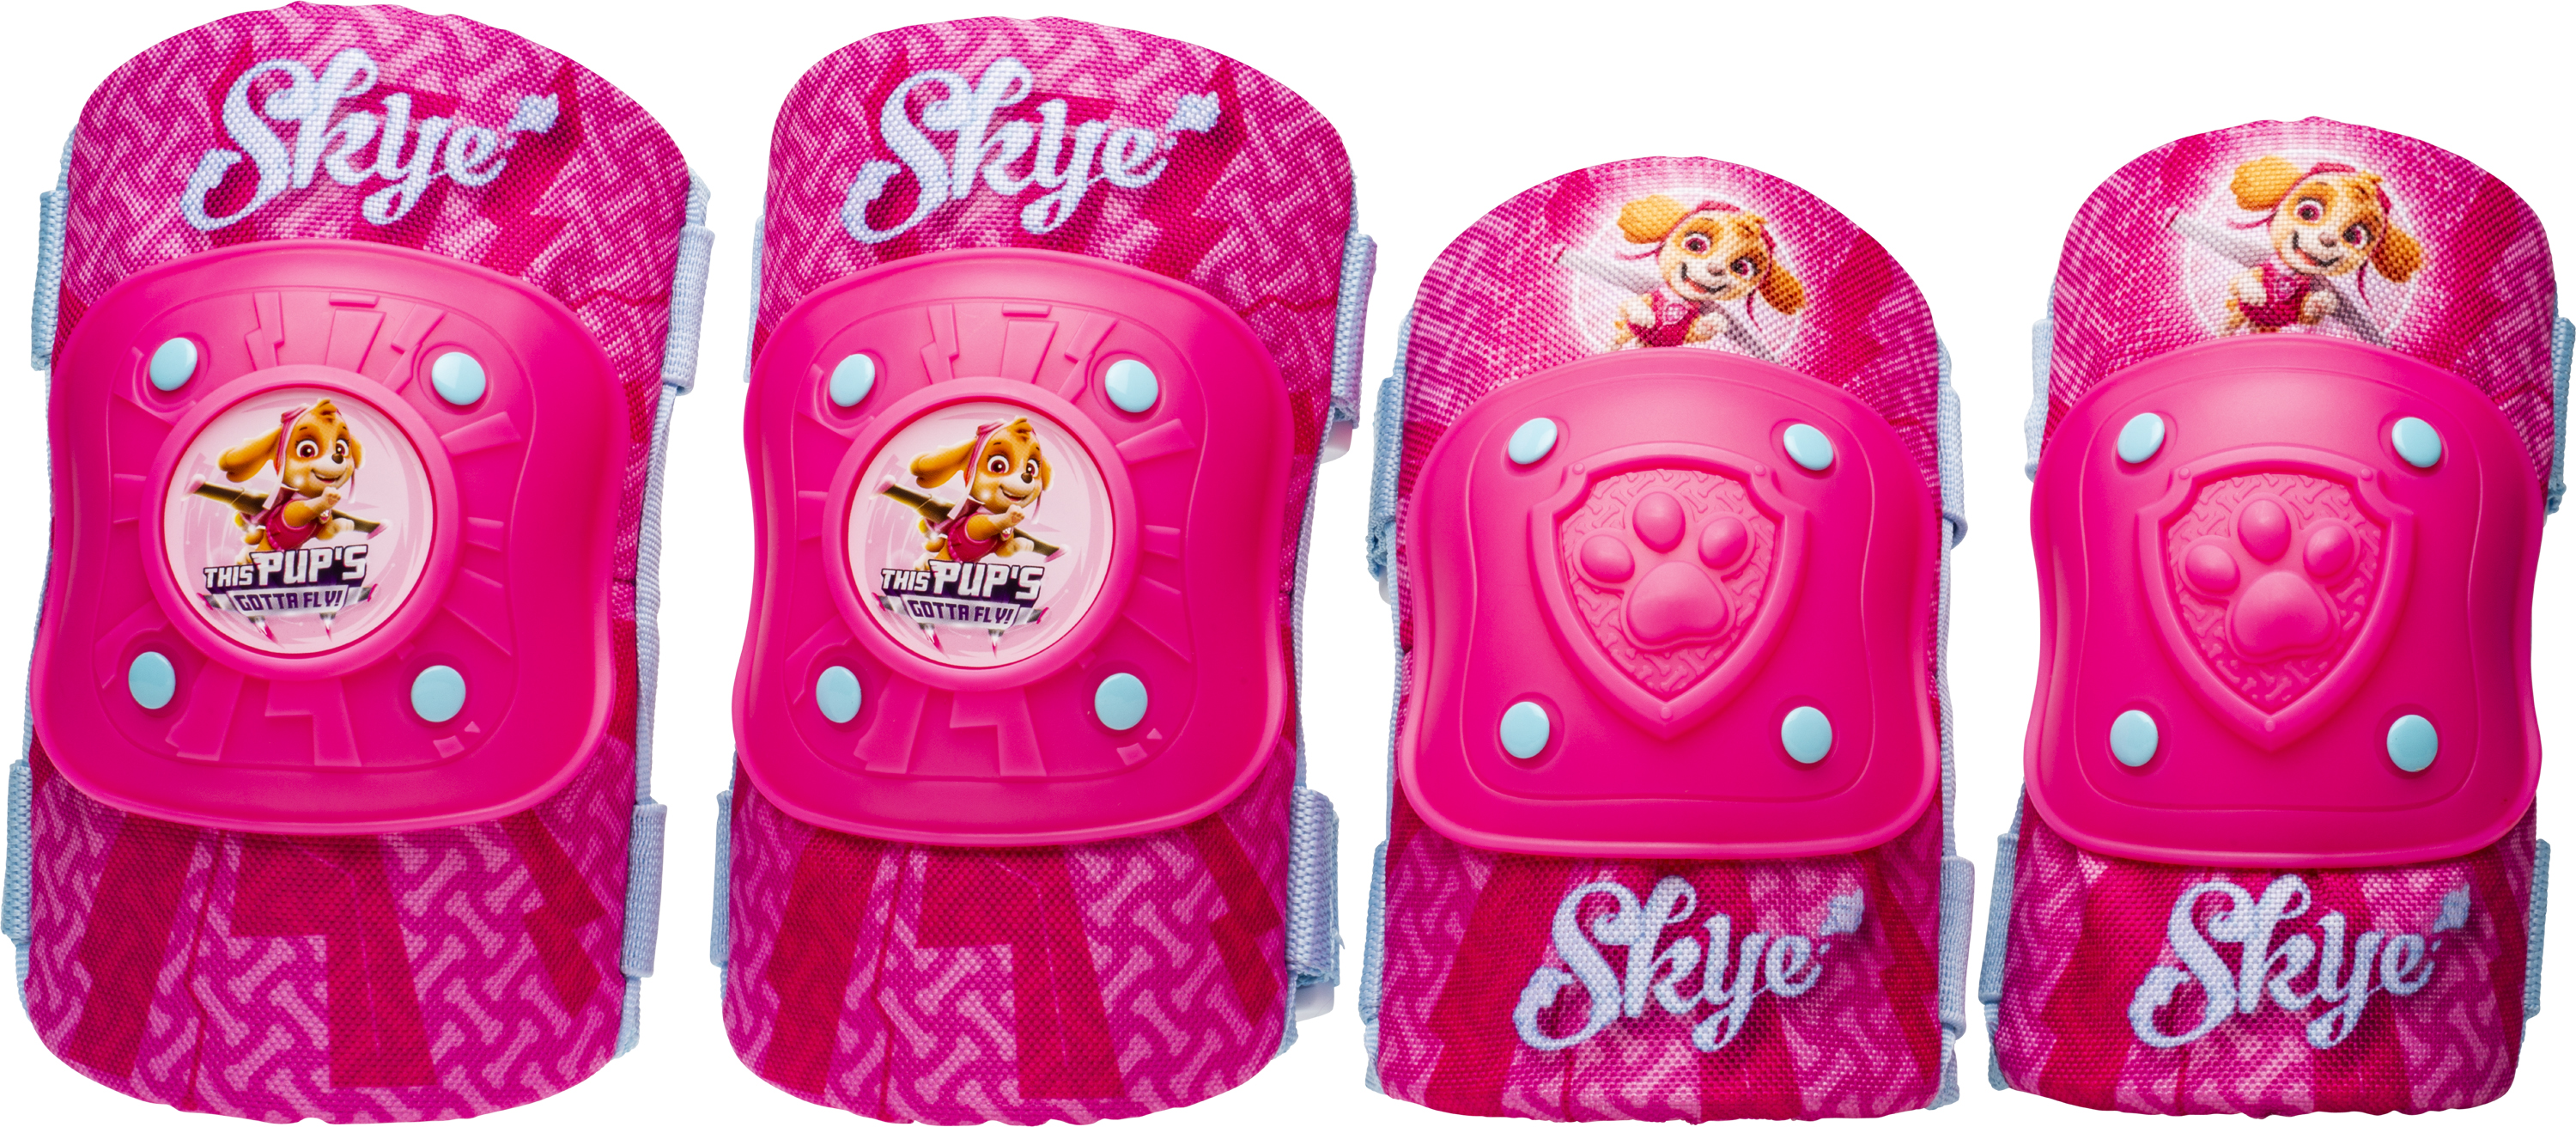 Details about  / Nickelodeon Paw Patrol Skye Protective Bike Gear /& Bell Ages 3-7 * Pink